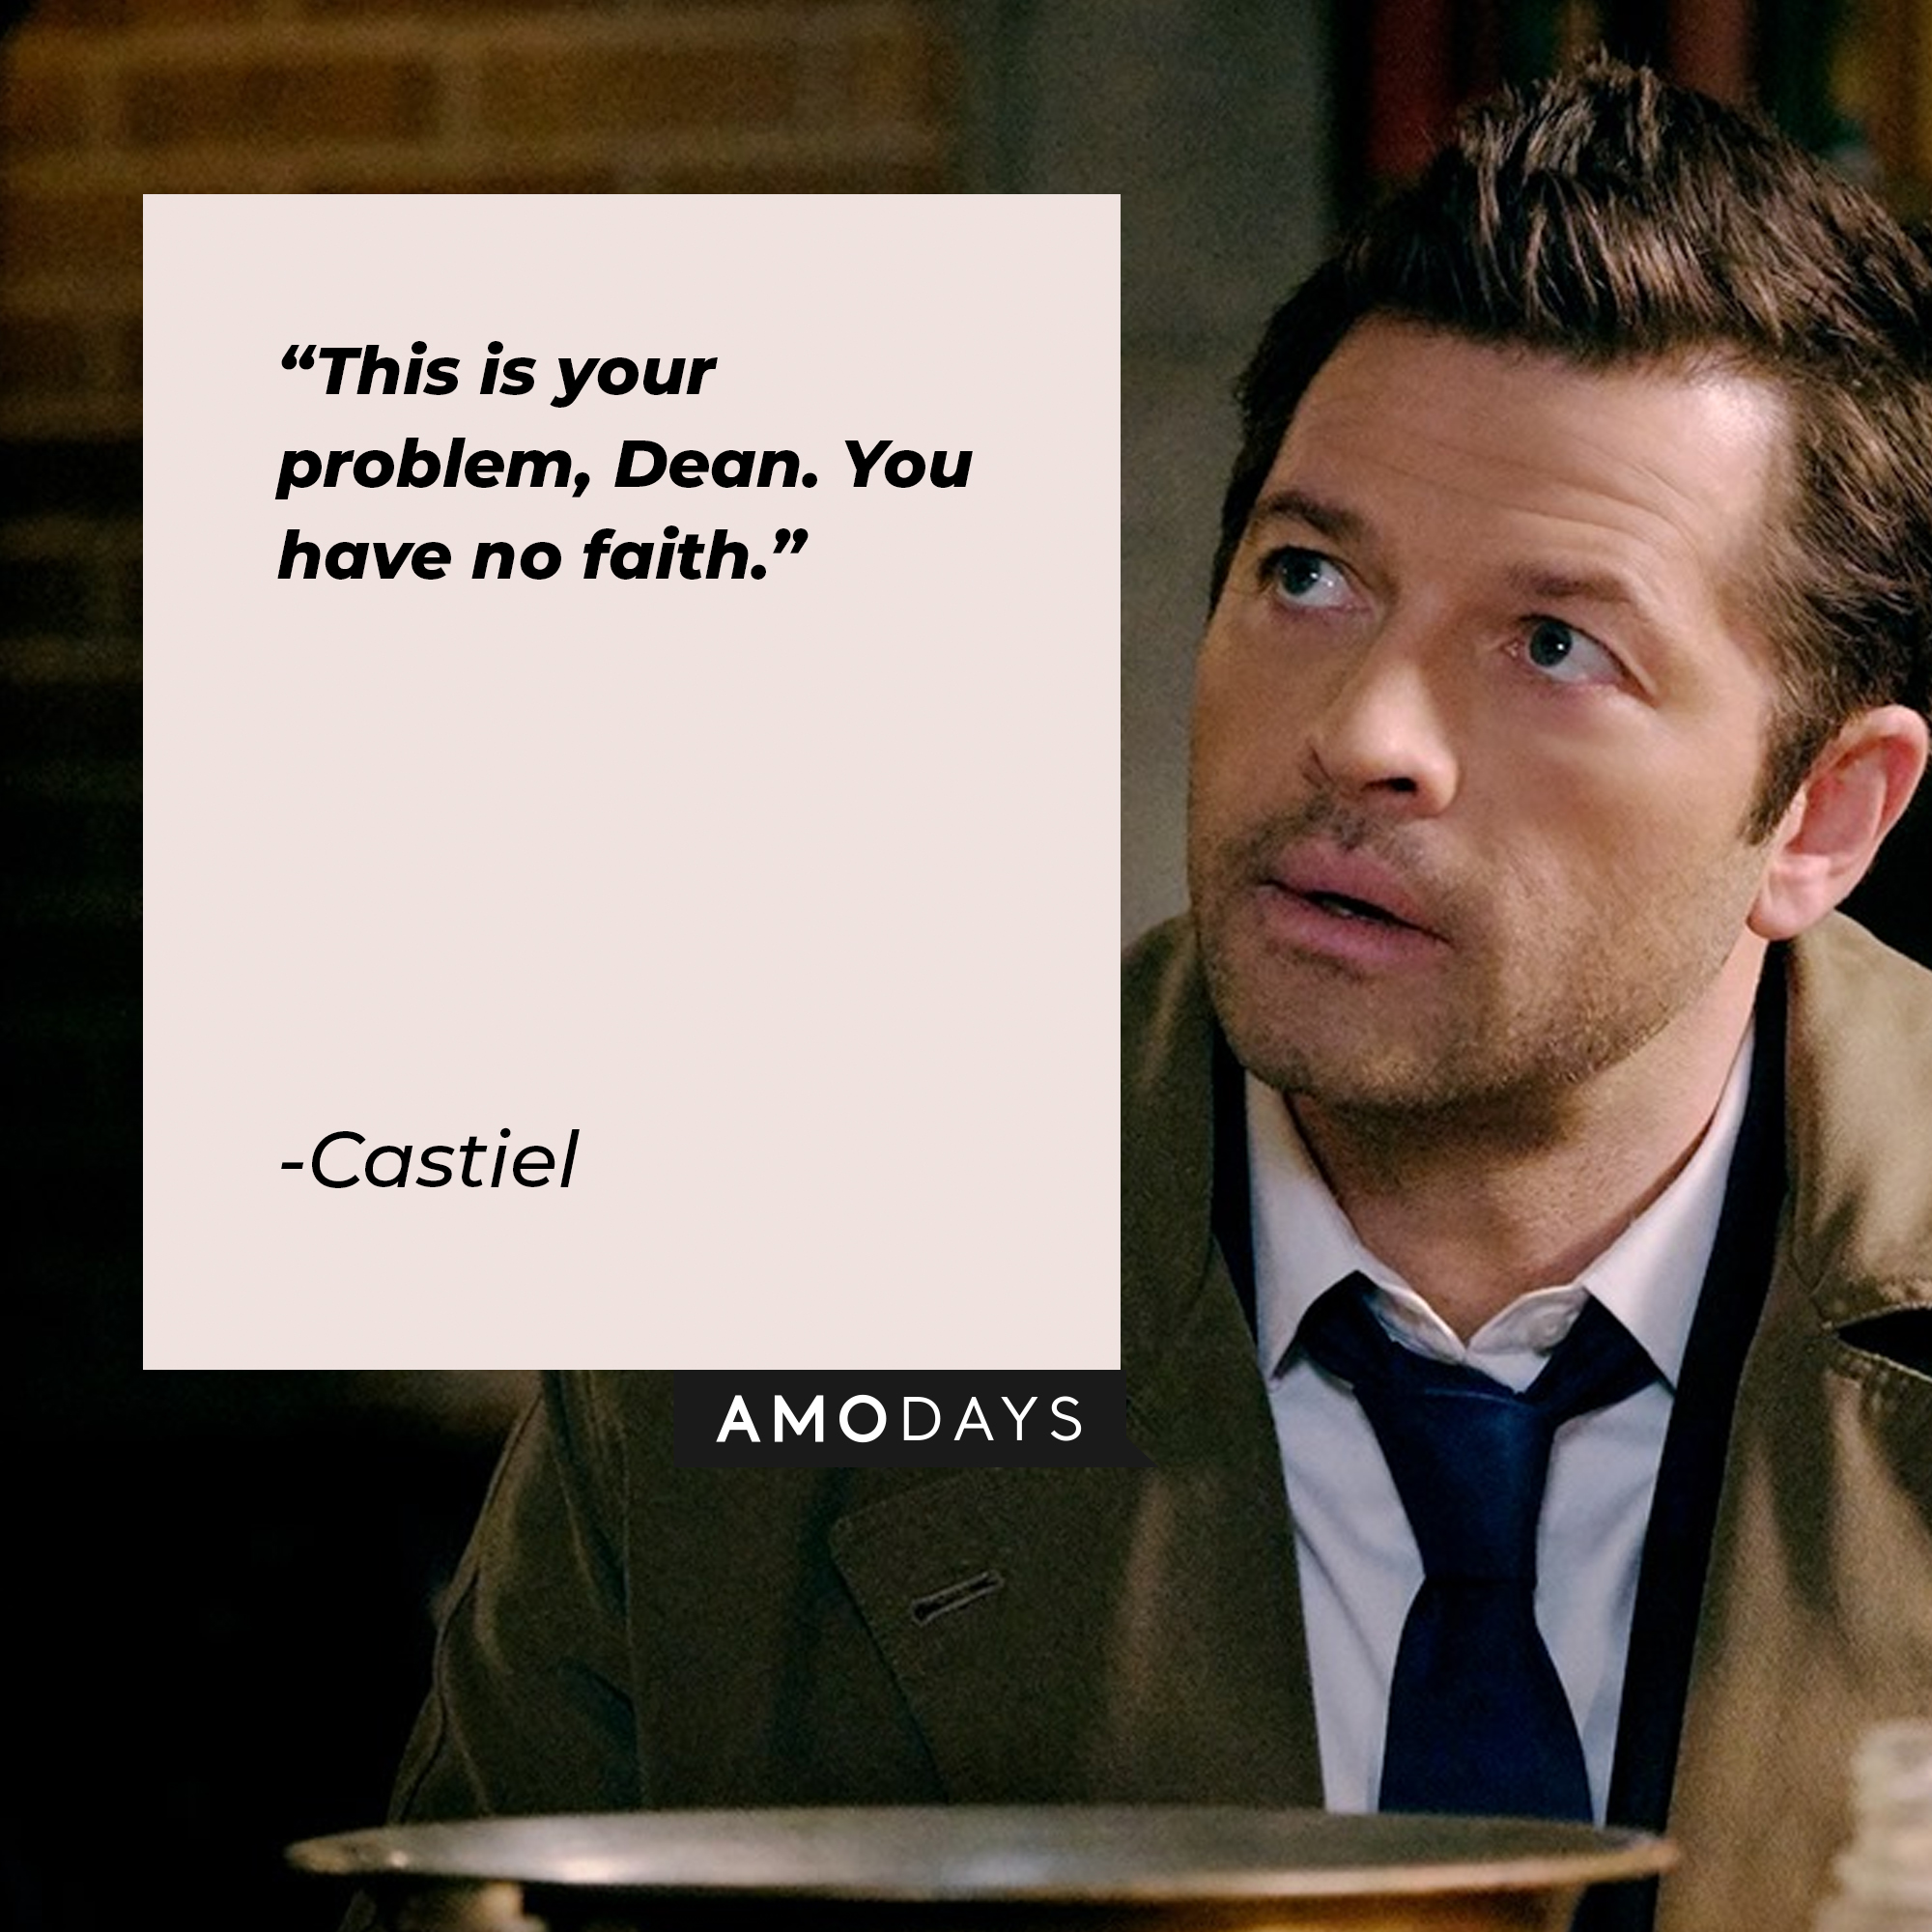 An image of Castiel with his quote: "This is your problem, Dean. You have no faith.” | Source: facebook.com/Supernatural